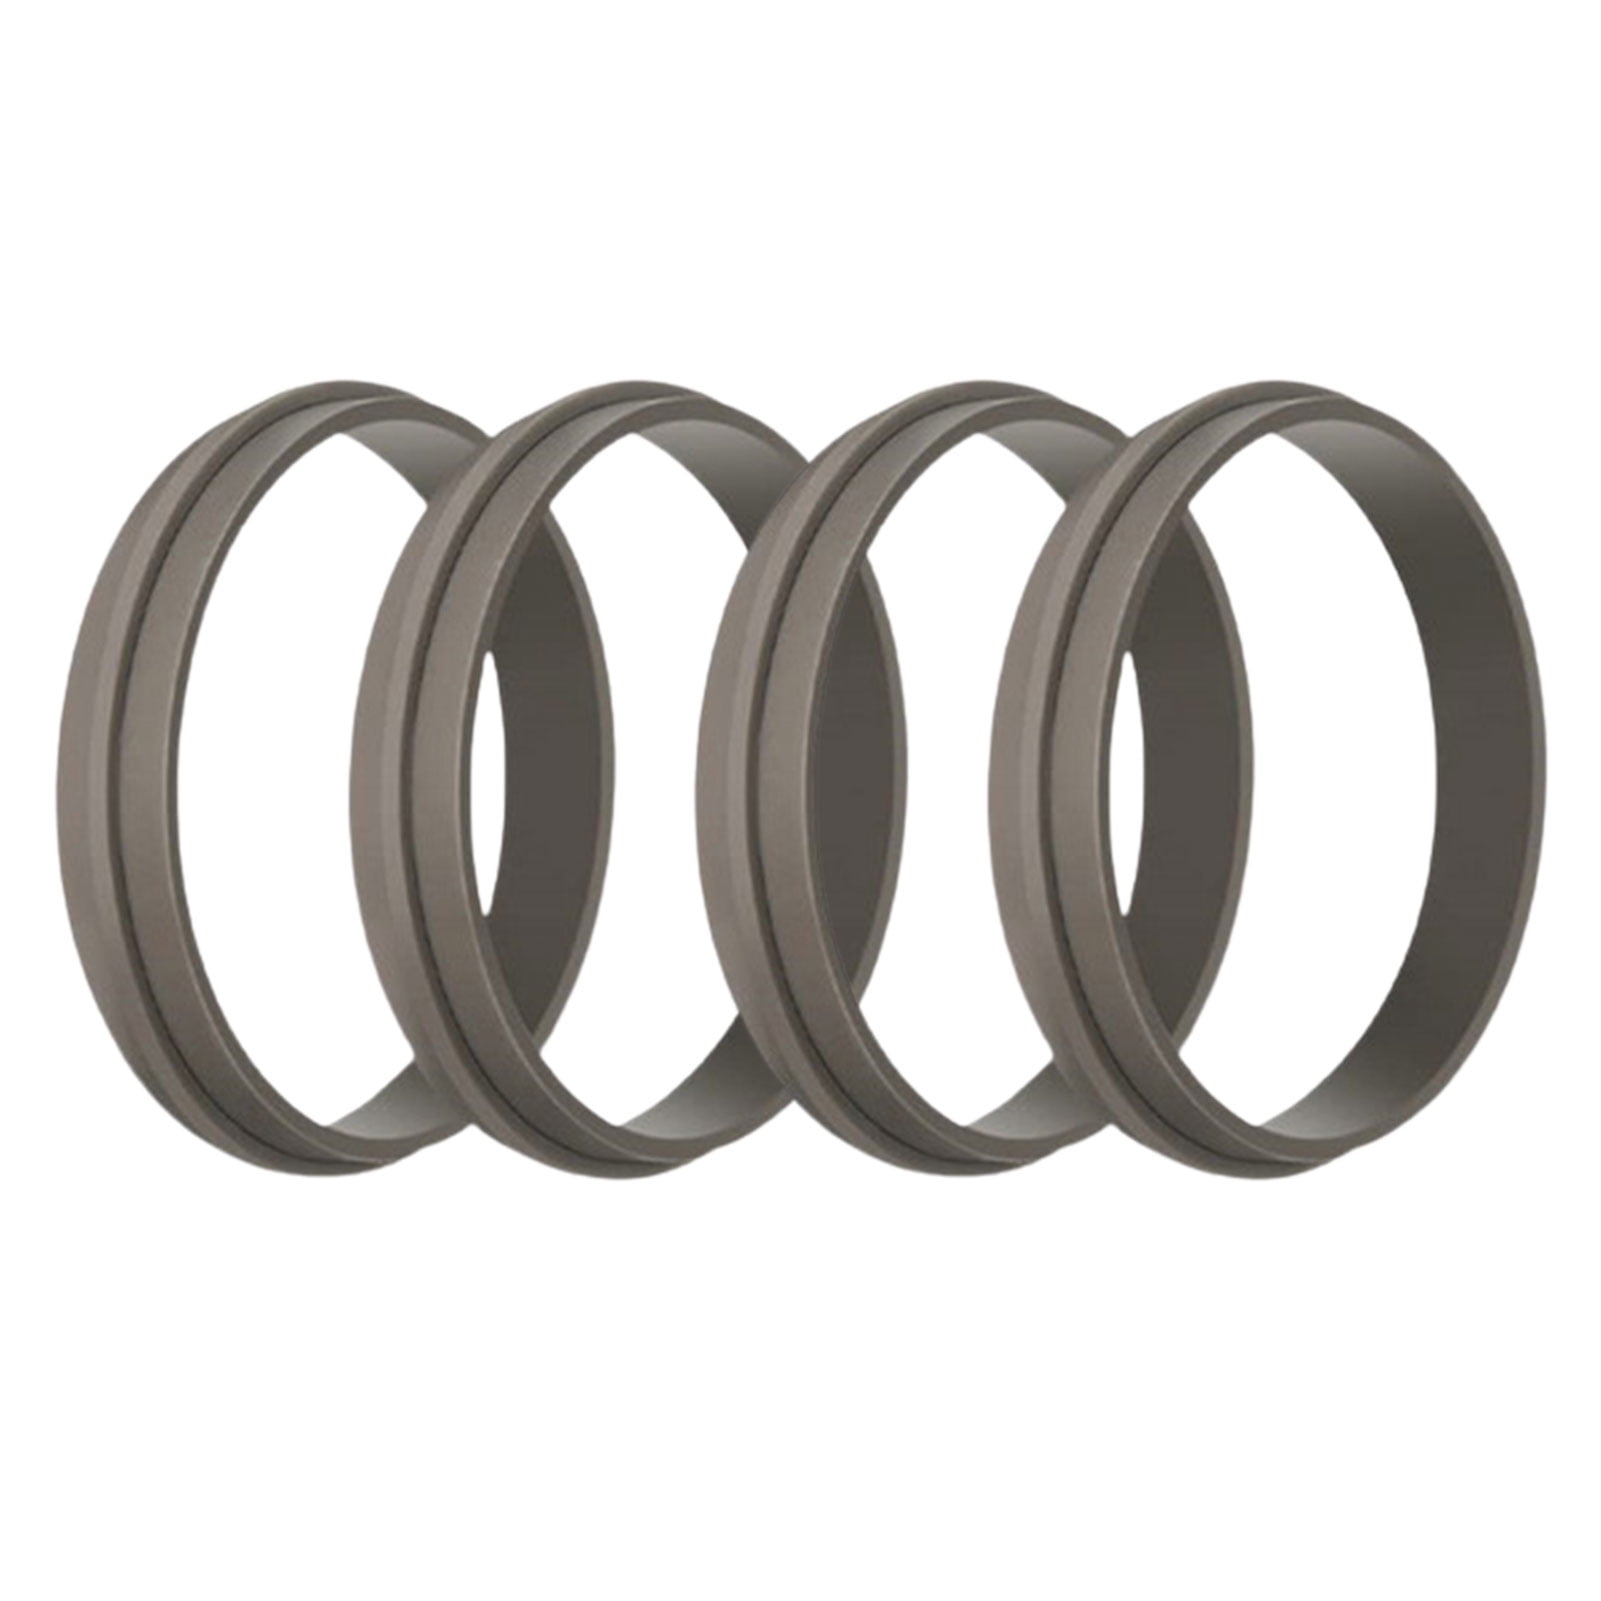  Replacement Rubber Lid Sealing Ring for Owala Water